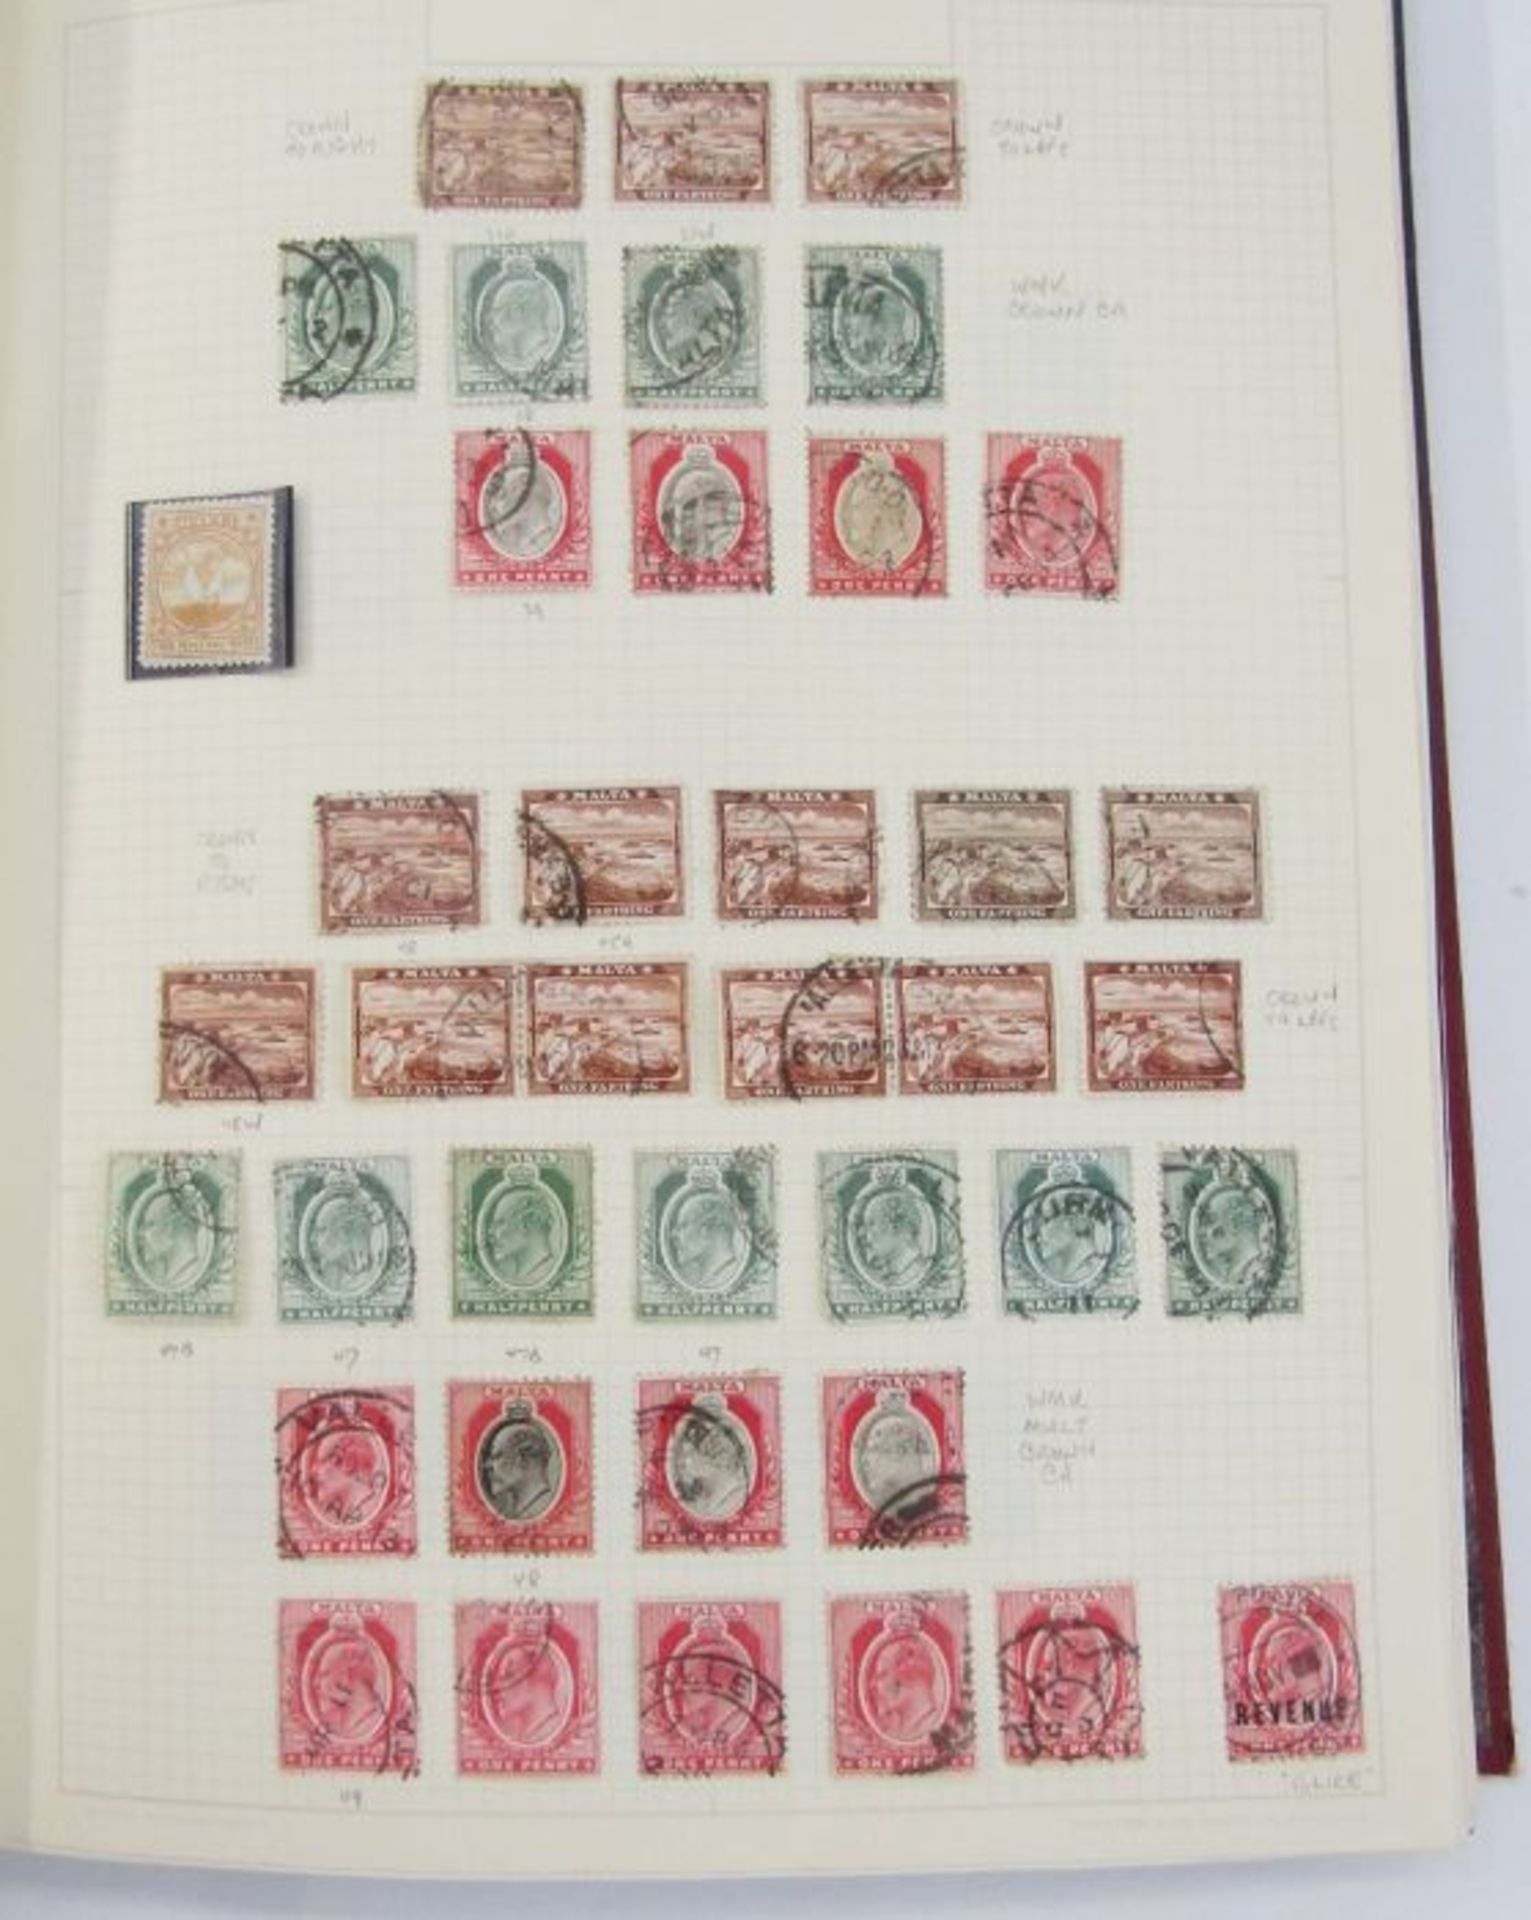 Malta: Red Senator album and 2 large stock-books of QV to Republic mint and used definitives, - Image 2 of 14